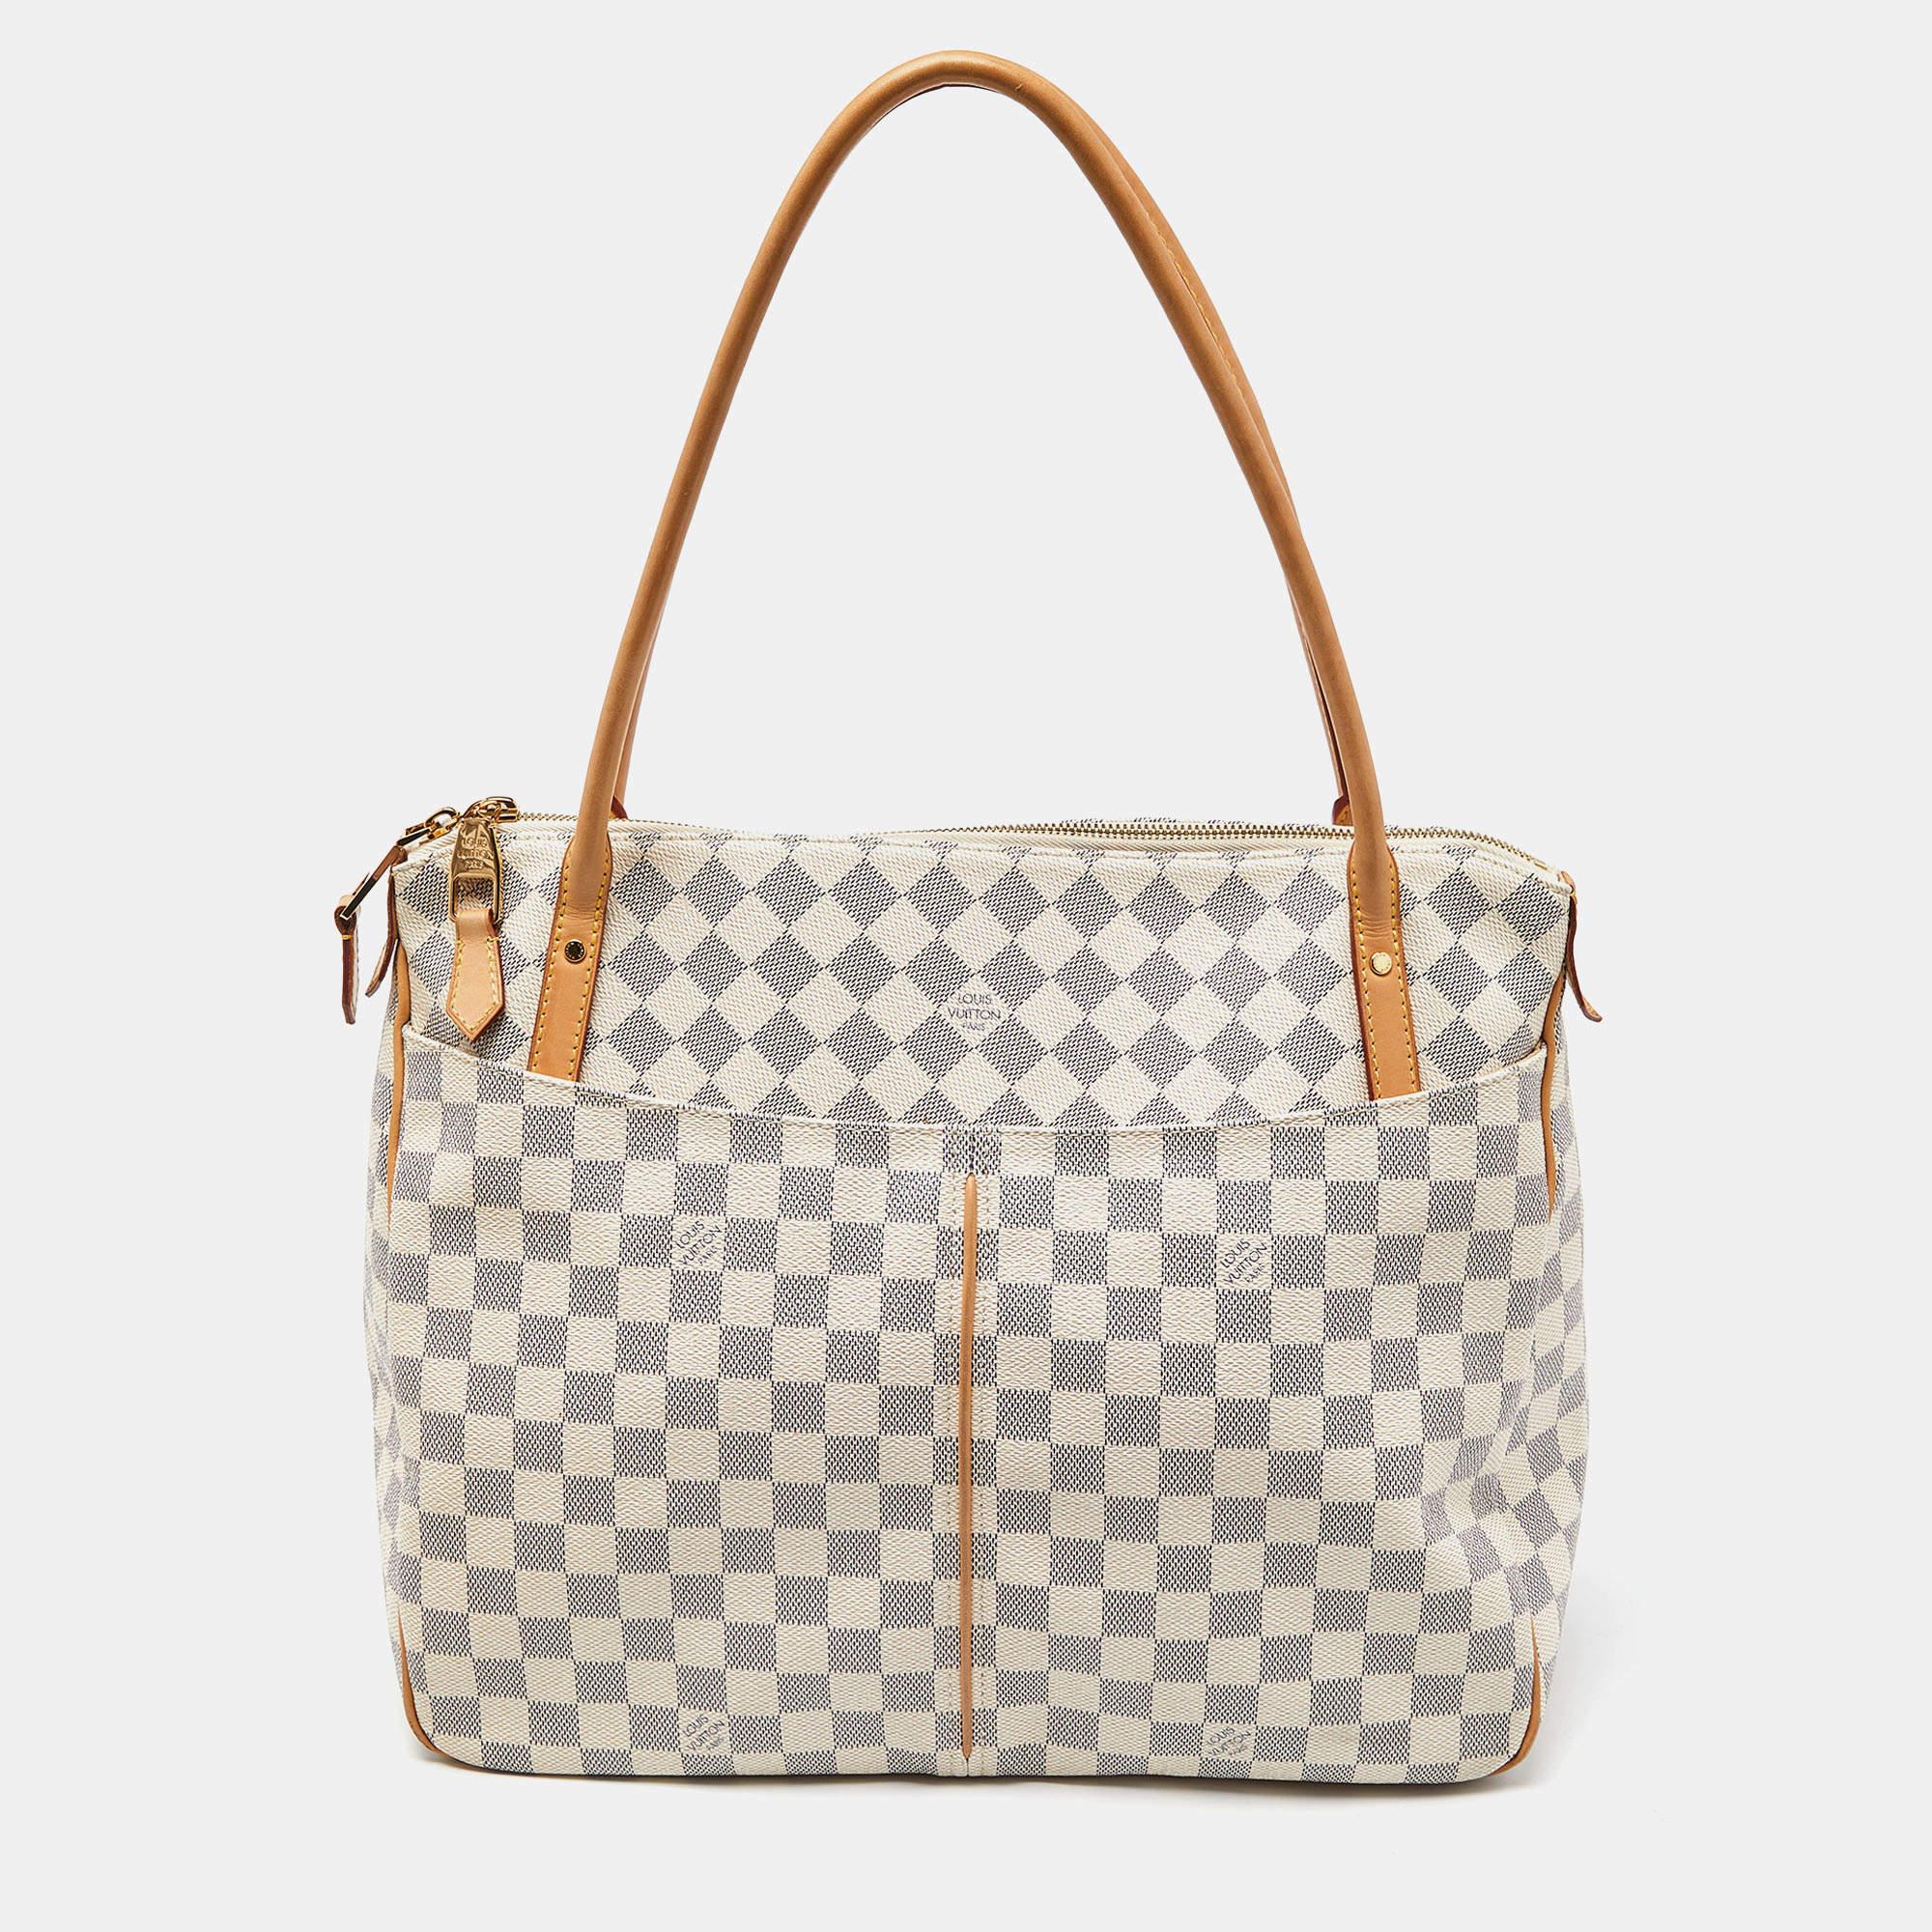 Indulge in timeless luxury with this Louis Vuitton bag for women. Meticulously crafted, this exquisite accessory embodies elegance, functionality, and style, making it the ultimate companion for every sophisticated woman.

Includes: Original